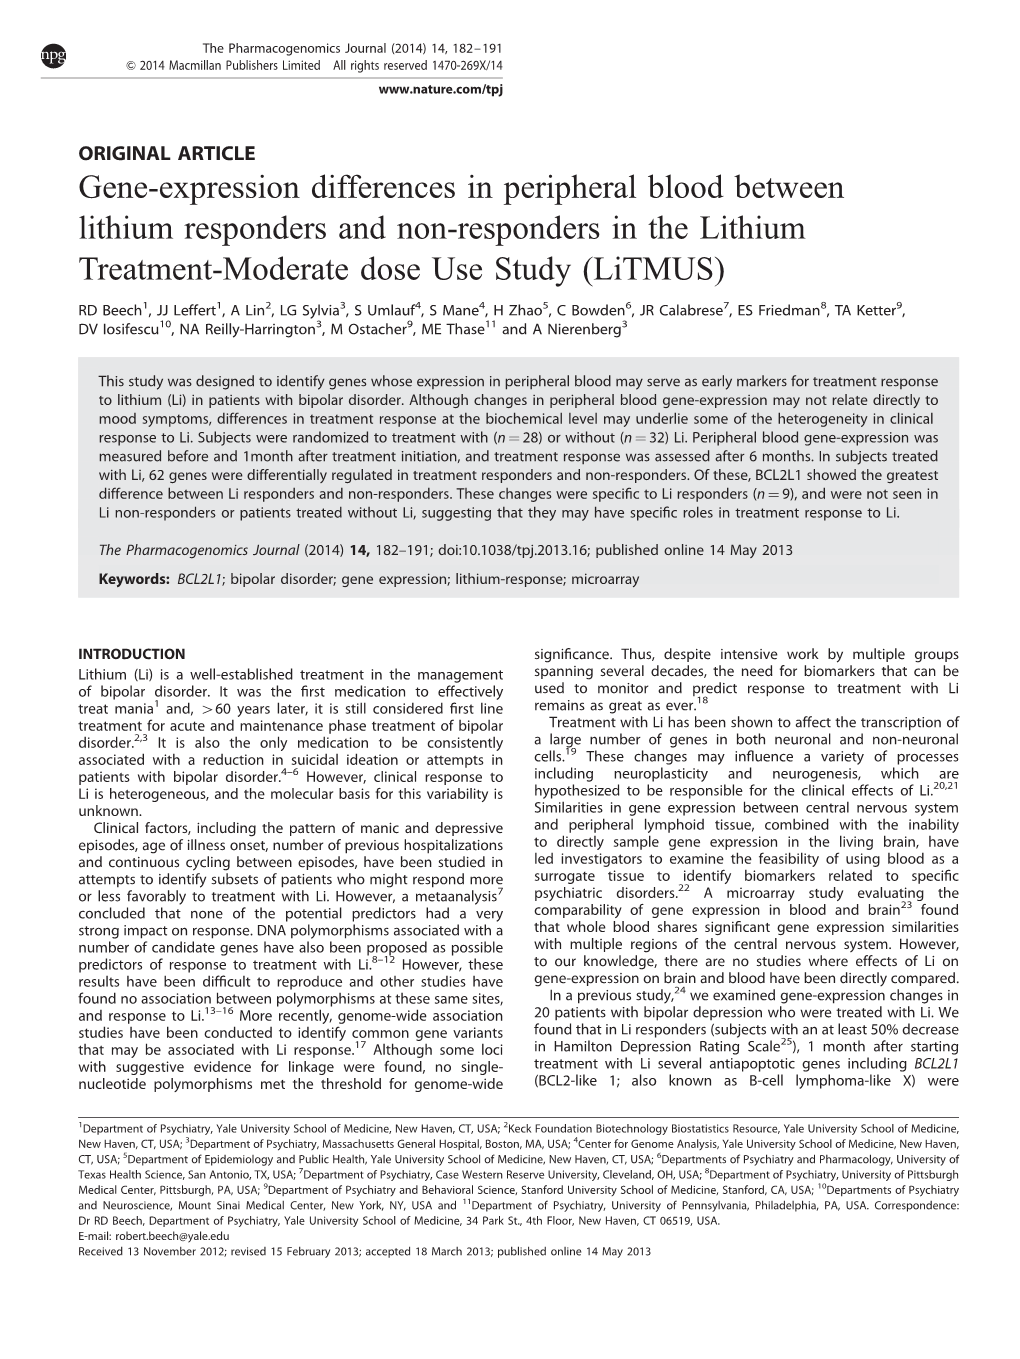 Gene-Expression Differences in Peripheral Blood Between Lithium Responders and Non-Responders in the Lithium Treatment-Moderate Dose Use Study (Litmus)